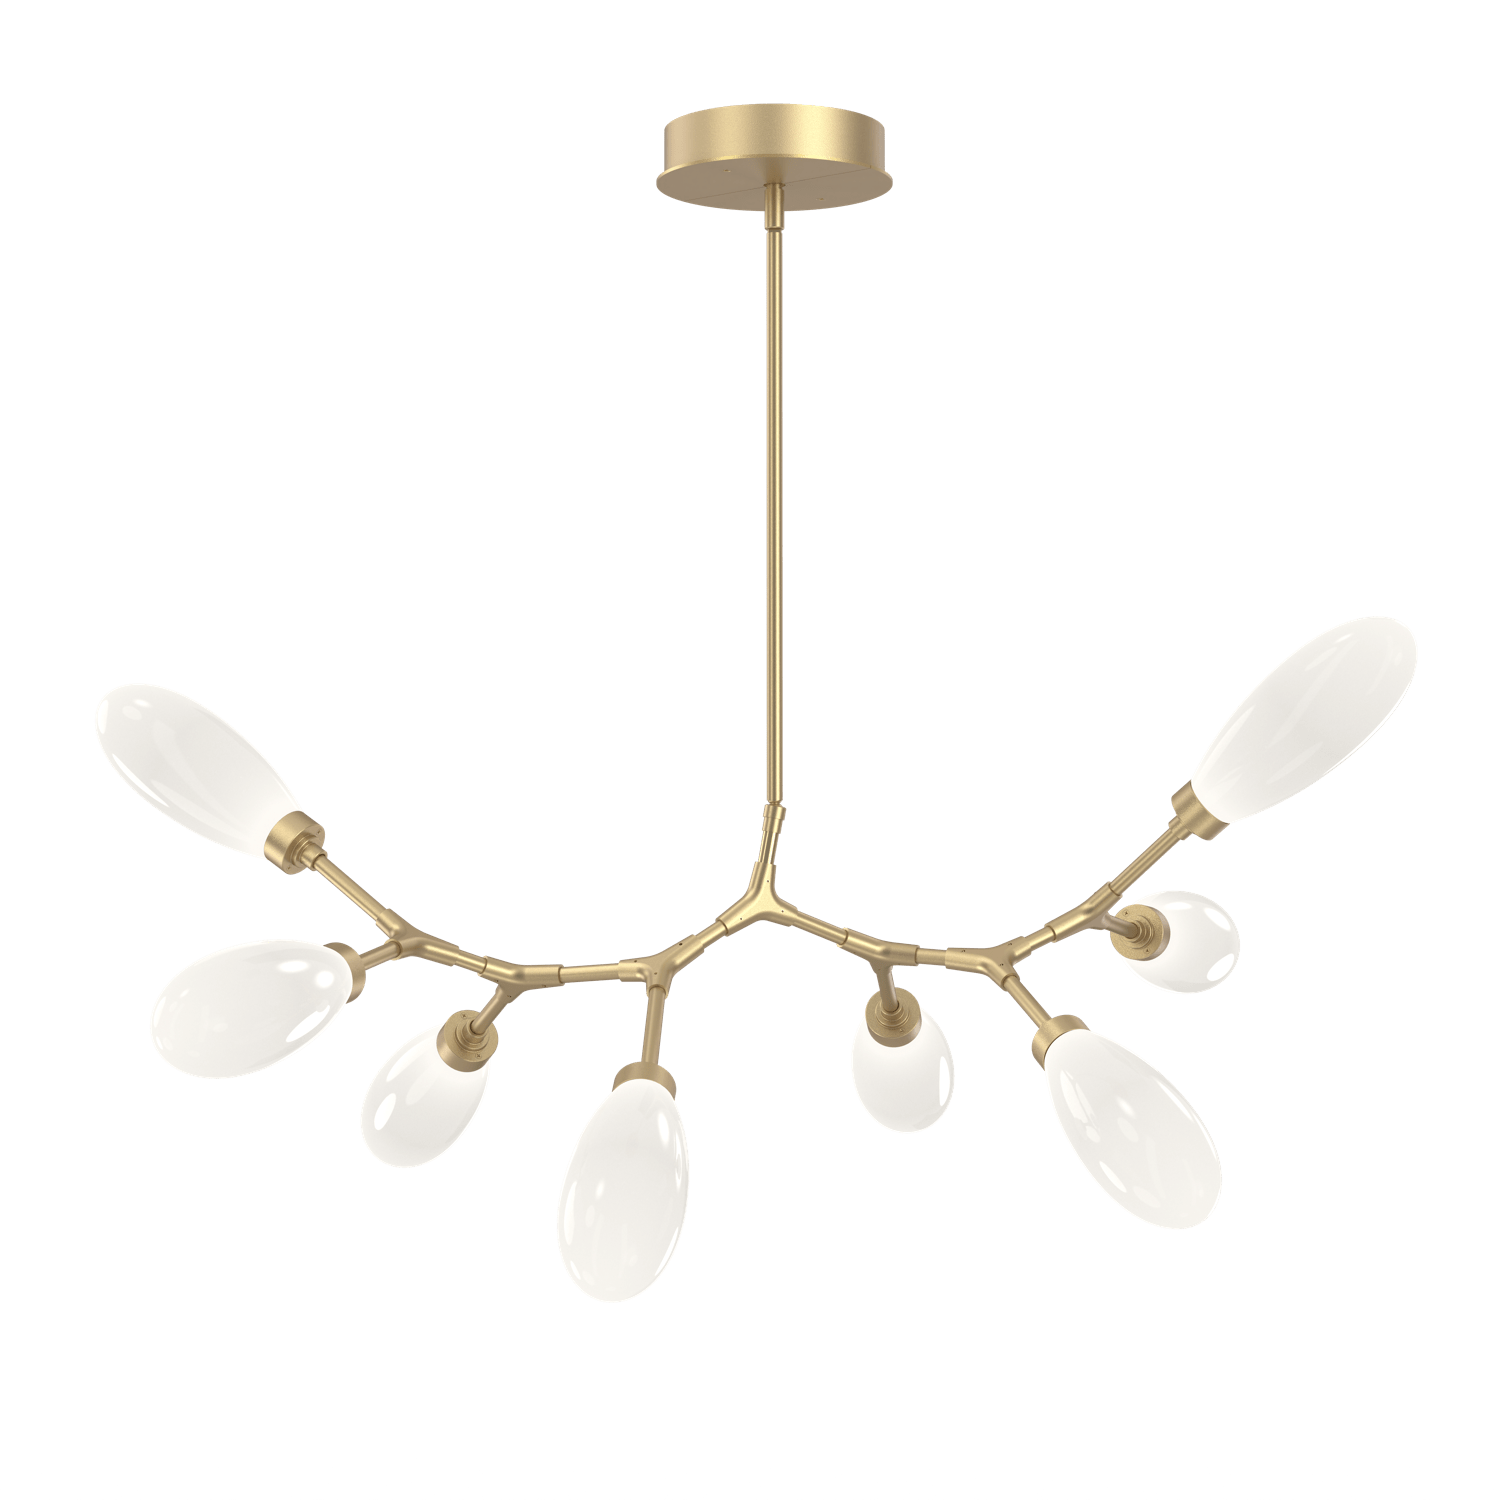 PLB0071-BB-GB-WL-LL-Hammerton-Studio-Fiori-8-light-organic-branch-chandelier-with-gilded-brass-finish-and-opal-white-glass-shades-and-LED-lamping